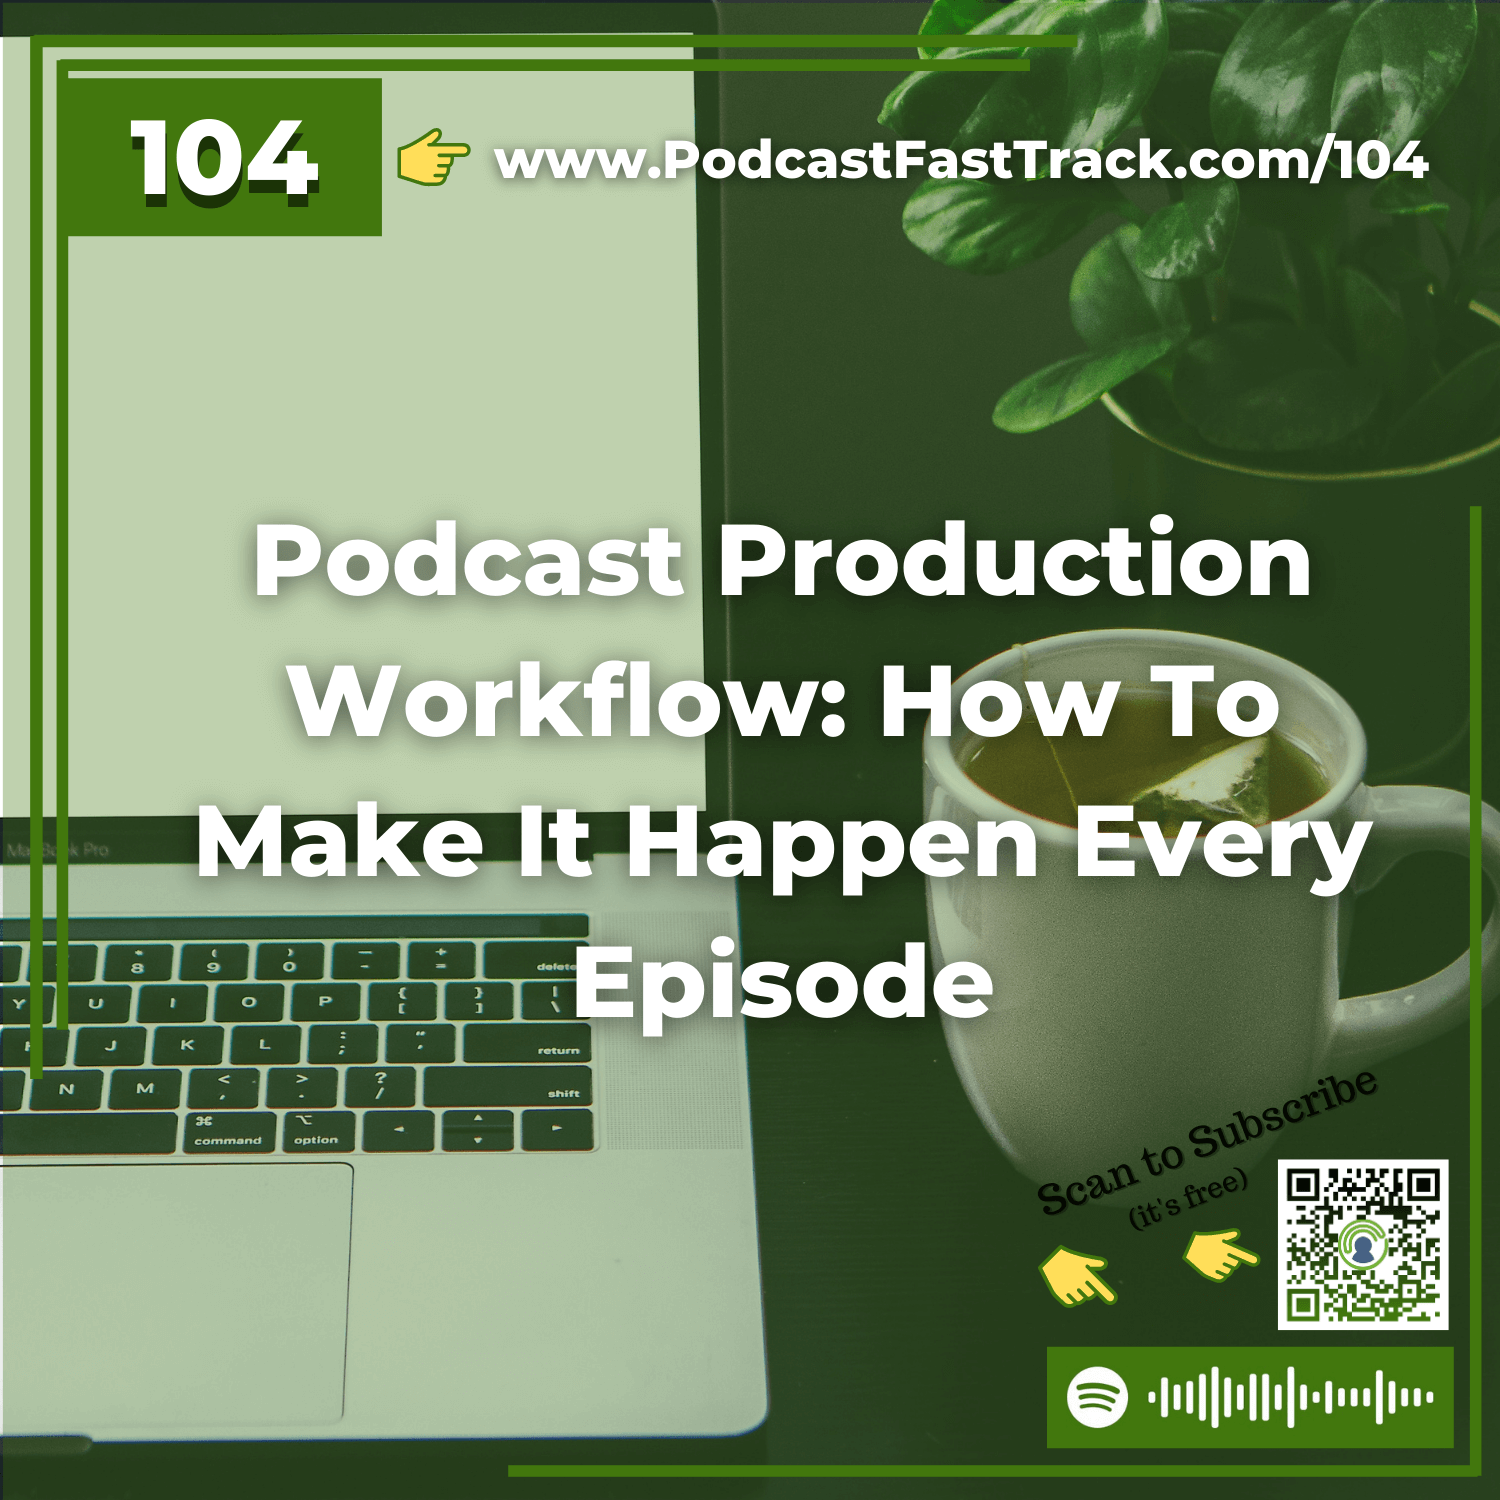 104: Podcast Production Workflow: How To Make It Happen Every Episode